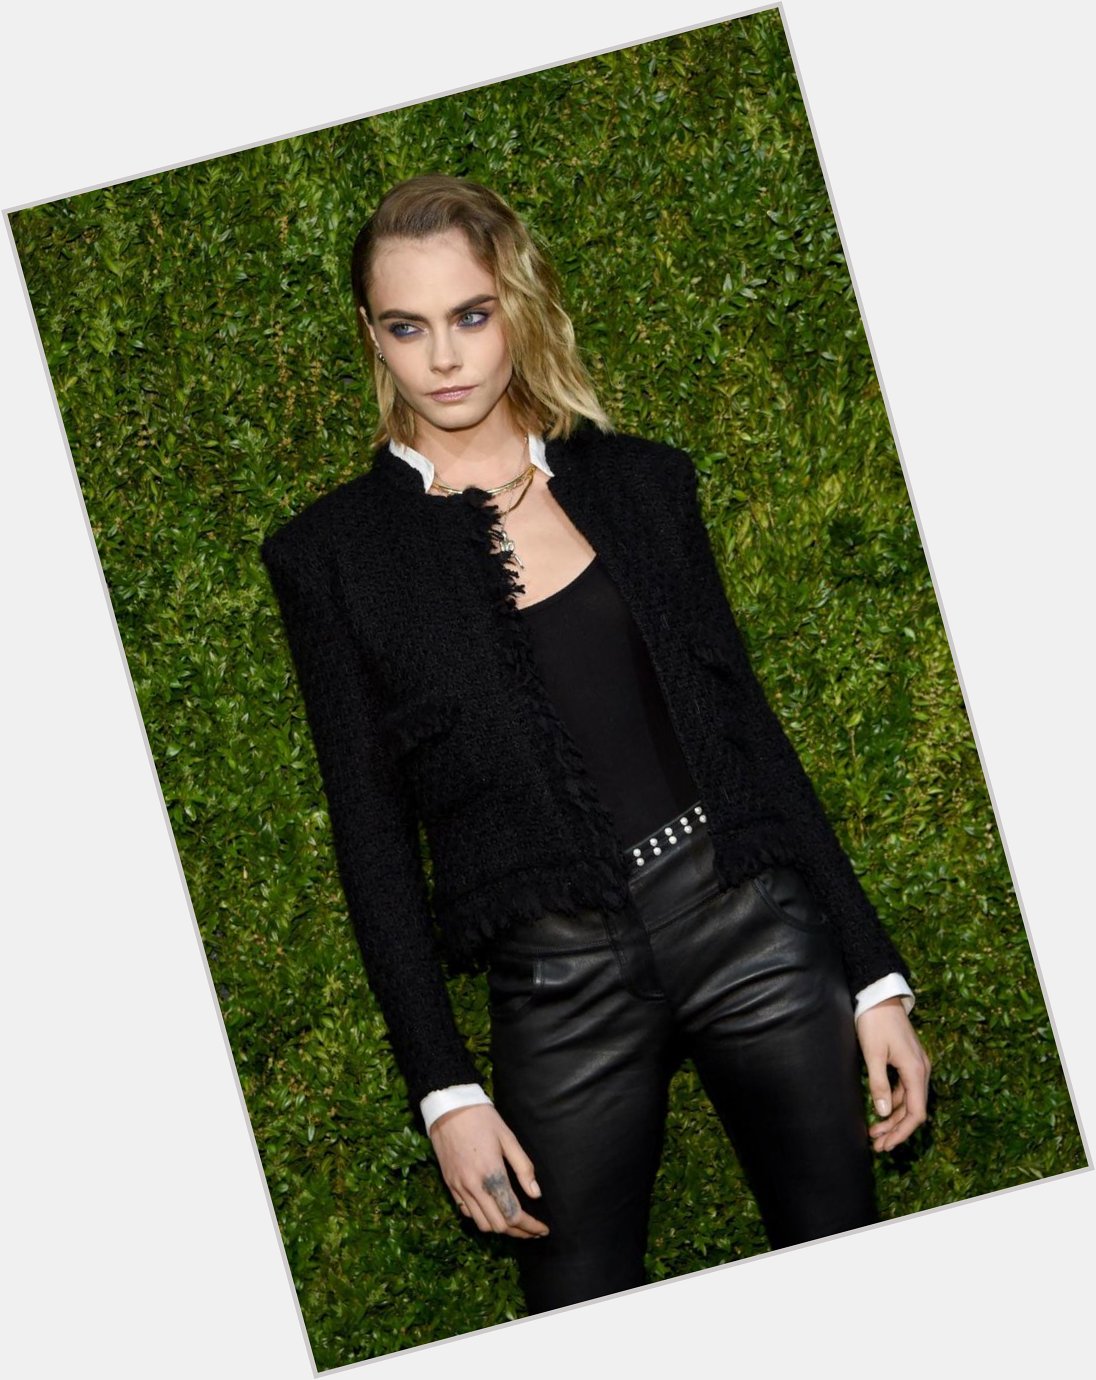 Happy birthday Cara Delevingne! The supermodel/actress turns 27 years old today. 

© Getty Images 